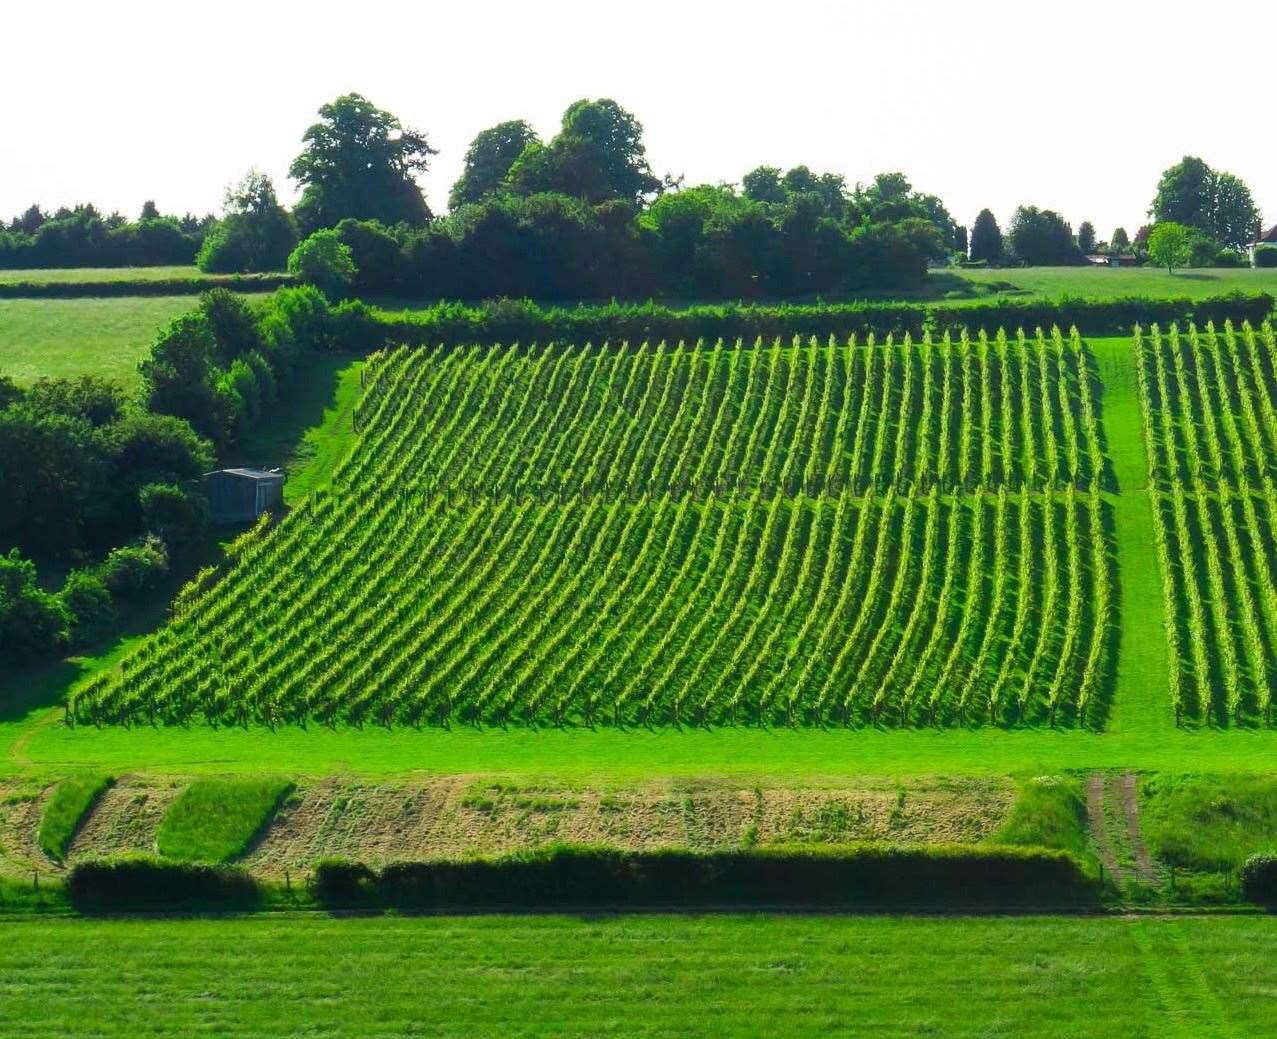 Meopham Valley Vineyard in the North Downs of Kent. Photo: Surinder Bassi